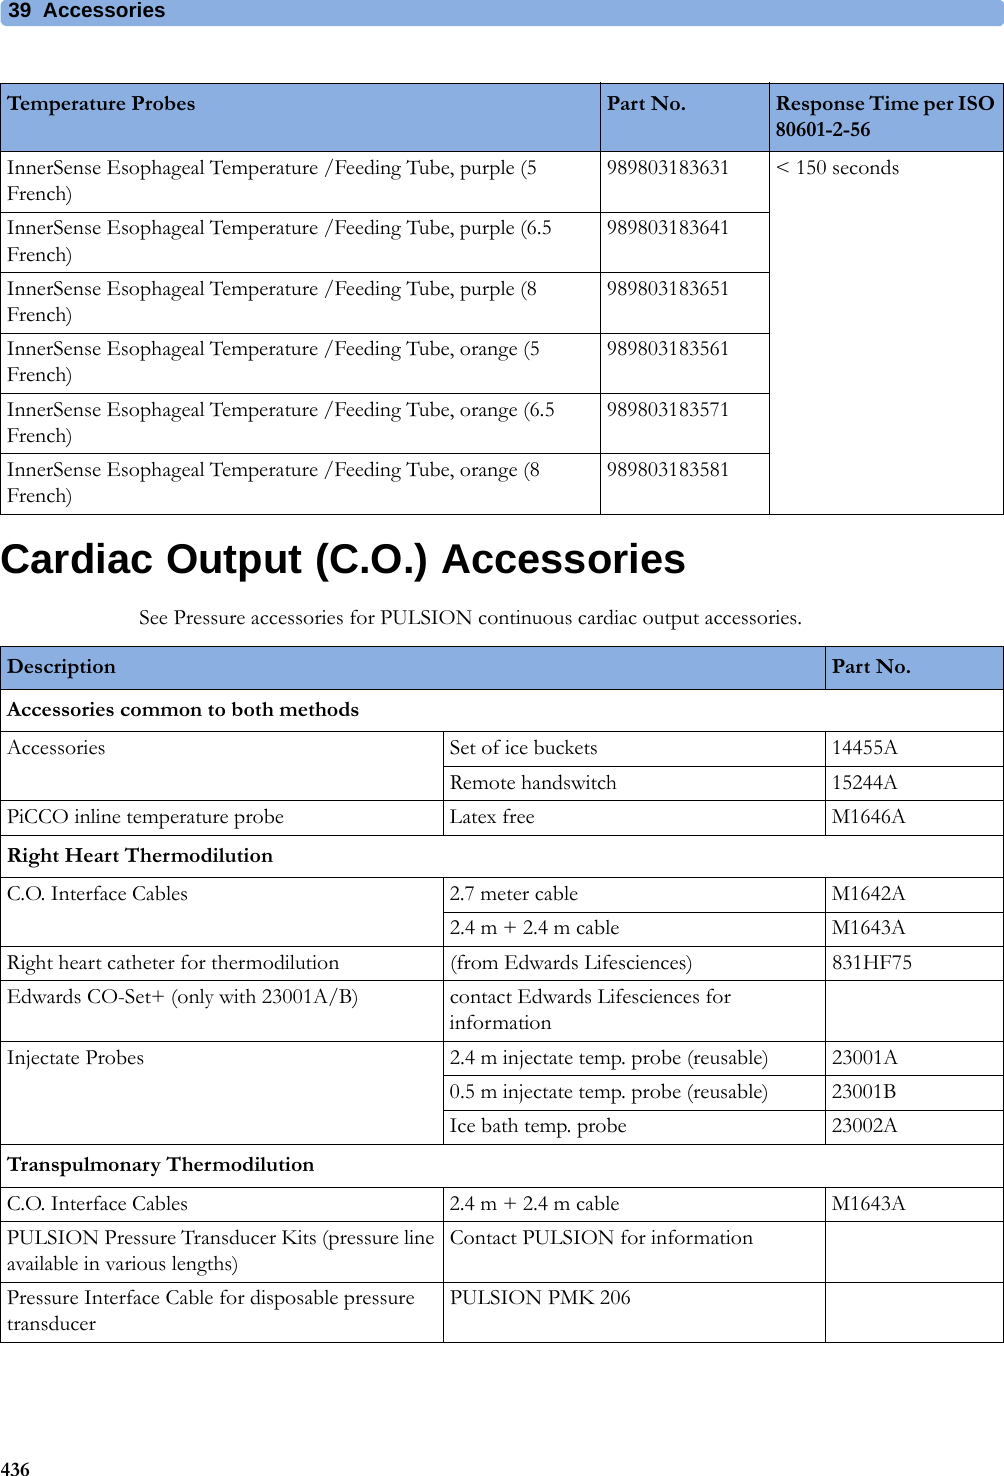 39 Accessories436Cardiac Output (C.O.) AccessoriesSee Pressure accessories for PULSION continuous cardiac output accessories.Temperature Probes Part No. Response Time per ISO 80601-2-56InnerSense Esophageal Temperature /Feeding Tube, purple (5 French)989803183631 &lt; 150 secondsInnerSense Esophageal Temperature /Feeding Tube, purple (6.5 French)989803183641InnerSense Esophageal Temperature /Feeding Tube, purple (8 French)989803183651InnerSense Esophageal Temperature /Feeding Tube, orange (5 French)989803183561InnerSense Esophageal Temperature /Feeding Tube, orange (6.5 French)989803183571InnerSense Esophageal Temperature /Feeding Tube, orange (8 French)989803183581Description Part No.Accessories common to both methodsAccessories Set of ice buckets 14455ARemote handswitch 15244APiCCO inline temperature probe Latex free M1646ARight Heart ThermodilutionC.O. Interface Cables 2.7 meter cable M1642A2.4 m + 2.4 m cable M1643ARight heart catheter for thermodilution (from Edwards Lifesciences) 831HF75Edwards CO-Set+ (only with 23001A/B) contact Edwards Lifesciences for informationInjectate Probes 2.4 m injectate temp. probe (reusable) 23001A0.5 m injectate temp. probe (reusable) 23001BIce bath temp. probe 23002ATranspulmonary ThermodilutionC.O. Interface Cables 2.4 m + 2.4 m cable M1643APULSION Pressure Transducer Kits (pressure line available in various lengths)Contact PULSION for informationPressure Interface Cable for disposable pressure transducerPULSION PMK 206